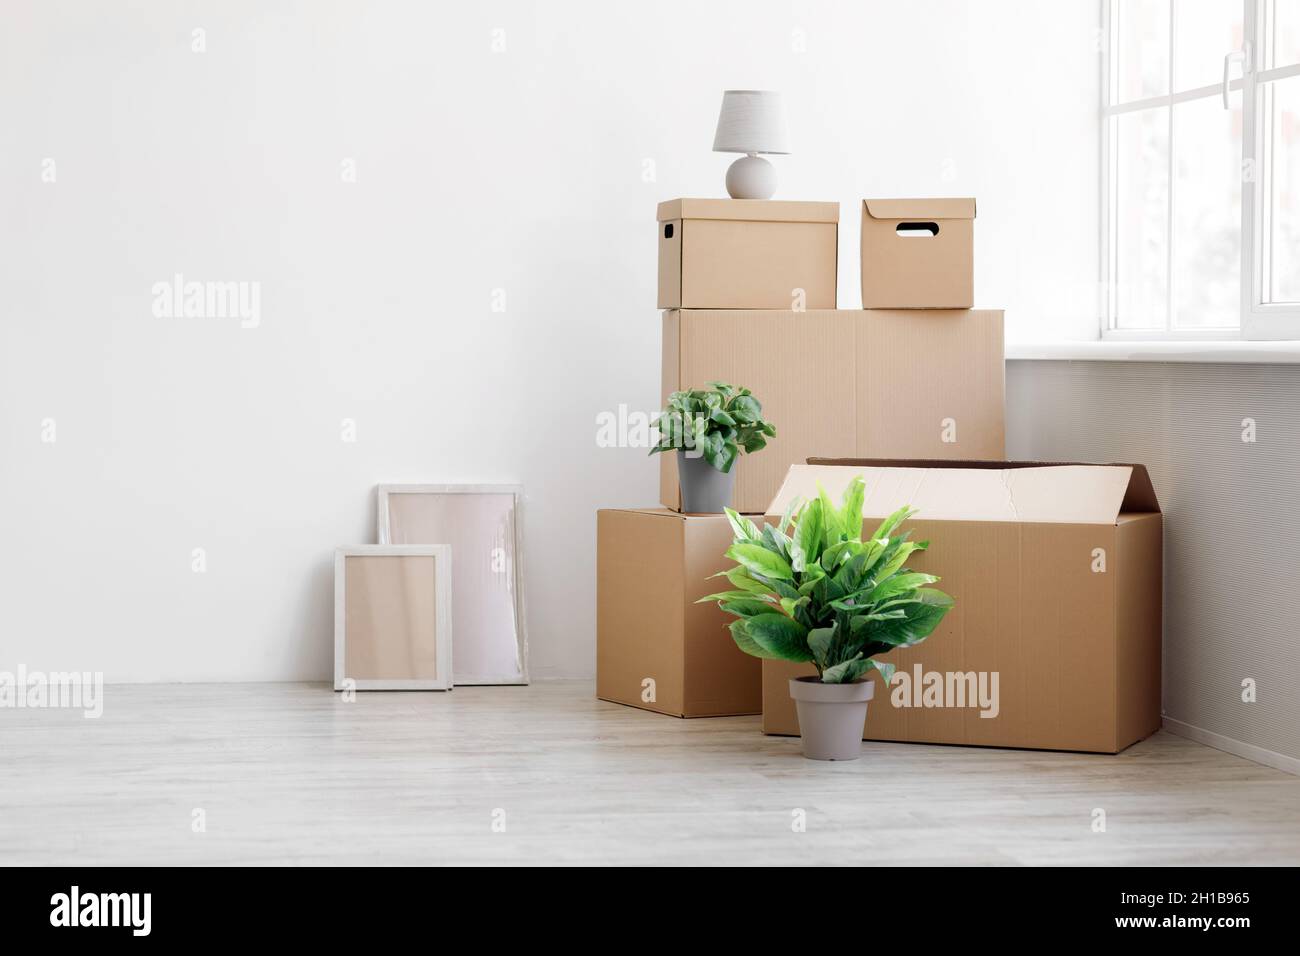 Stack of many different cardboard boxes with goods and green plants in pots on floor on white wall background Stock Photo